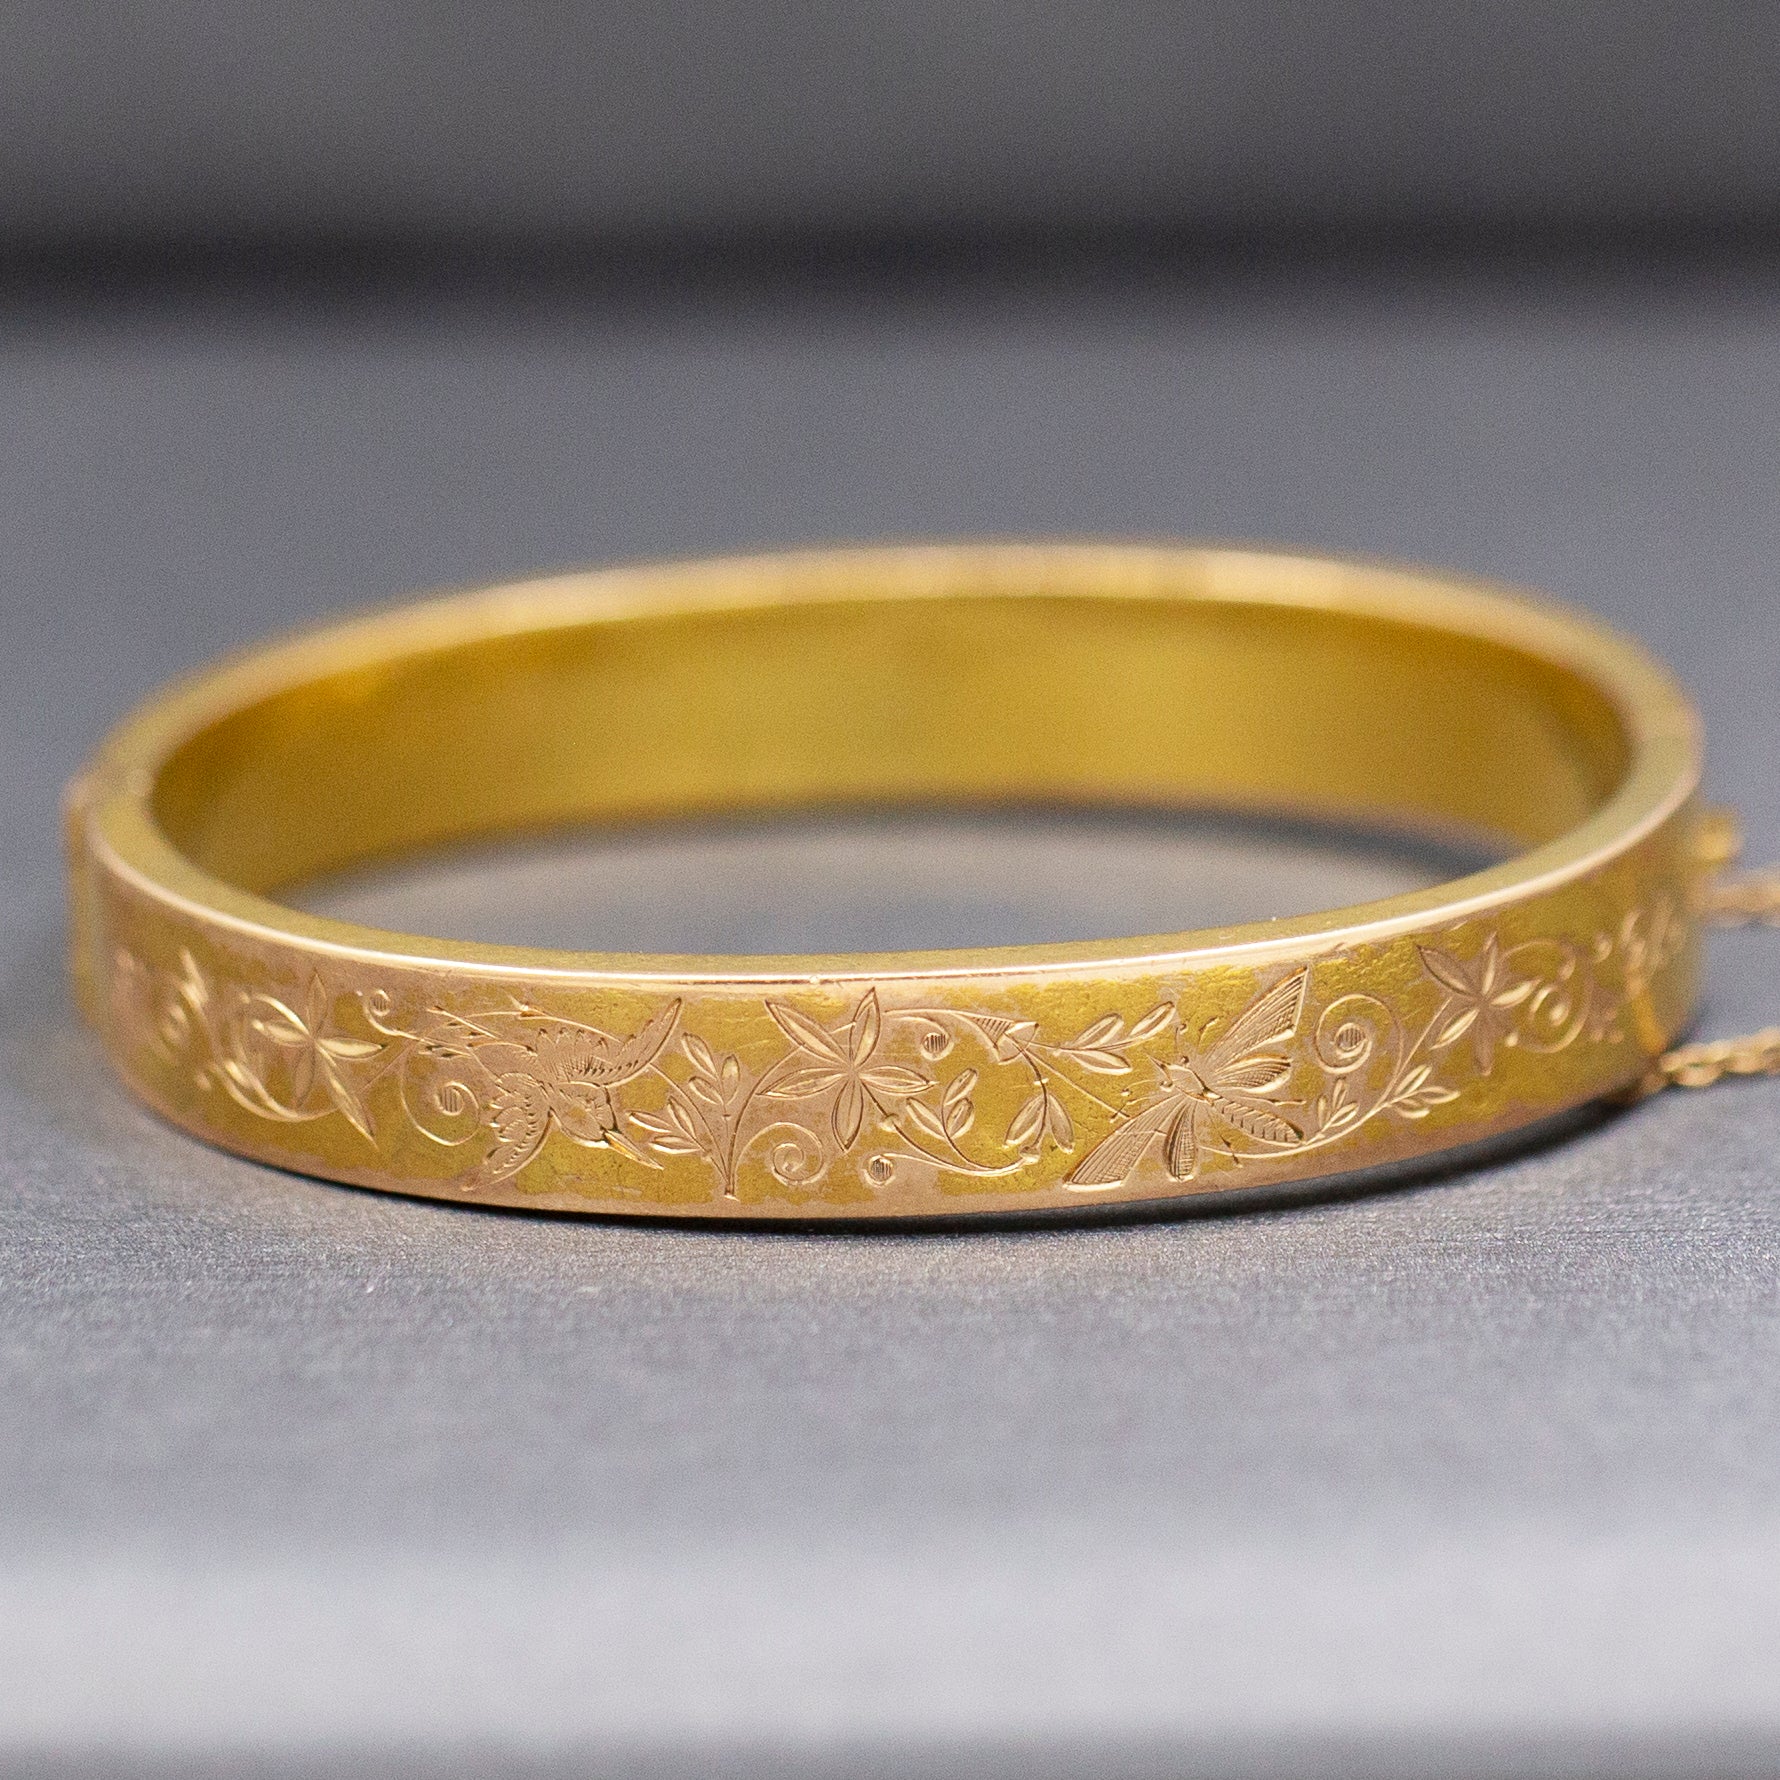 Antique Victorian Floral Engraved Oval Hinged Bangle Bracelet in 14k Yellow Gold